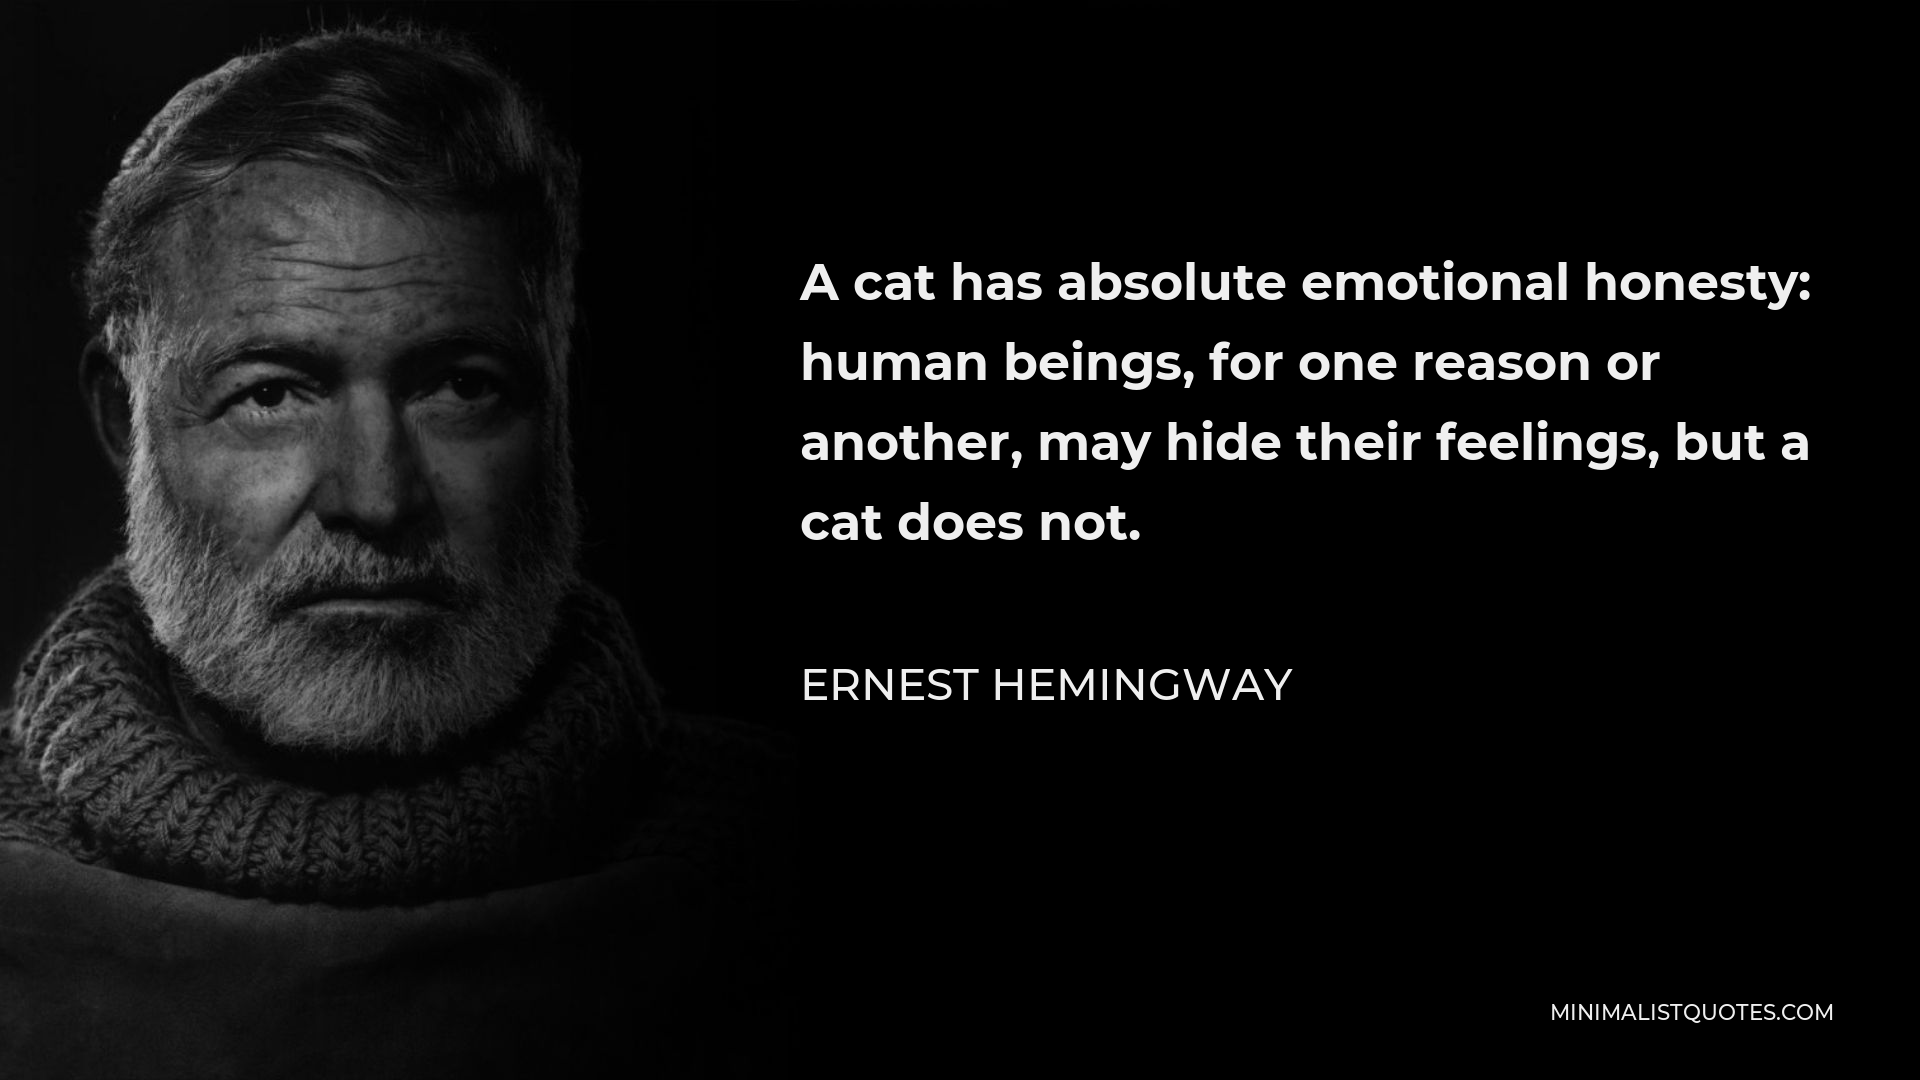 Ernest Hemingway Quote - A cat has absolute emotional honesty: human beings, for one reason or another, may hide their feelings, but a cat does not.